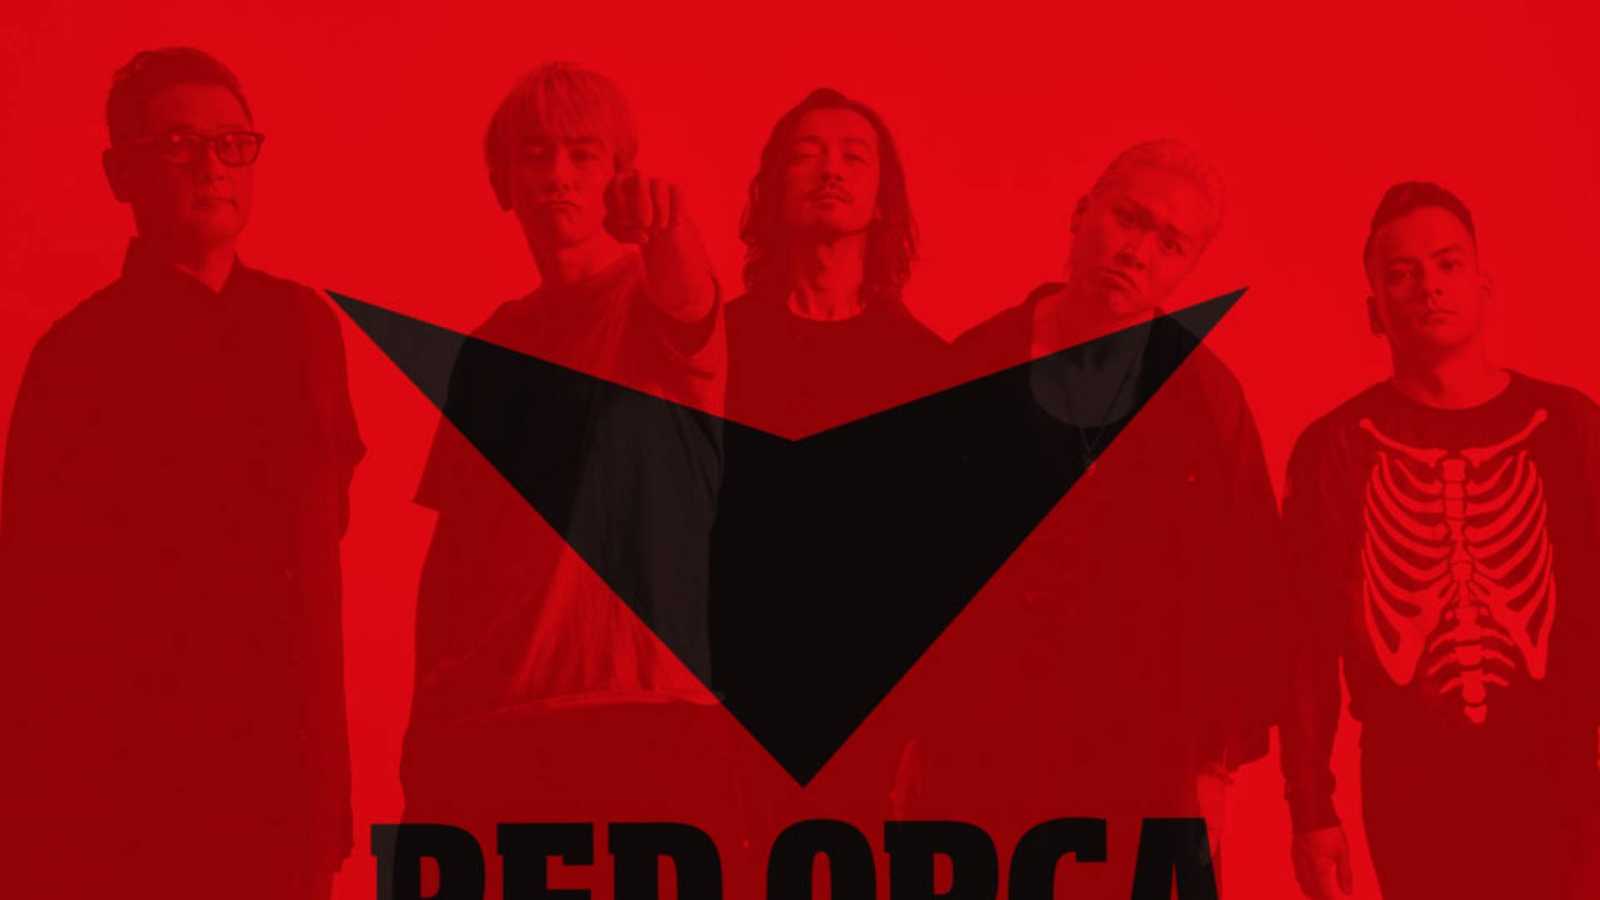 Pierwszy album RED ORCA © RED ORCA. All rights reserved.